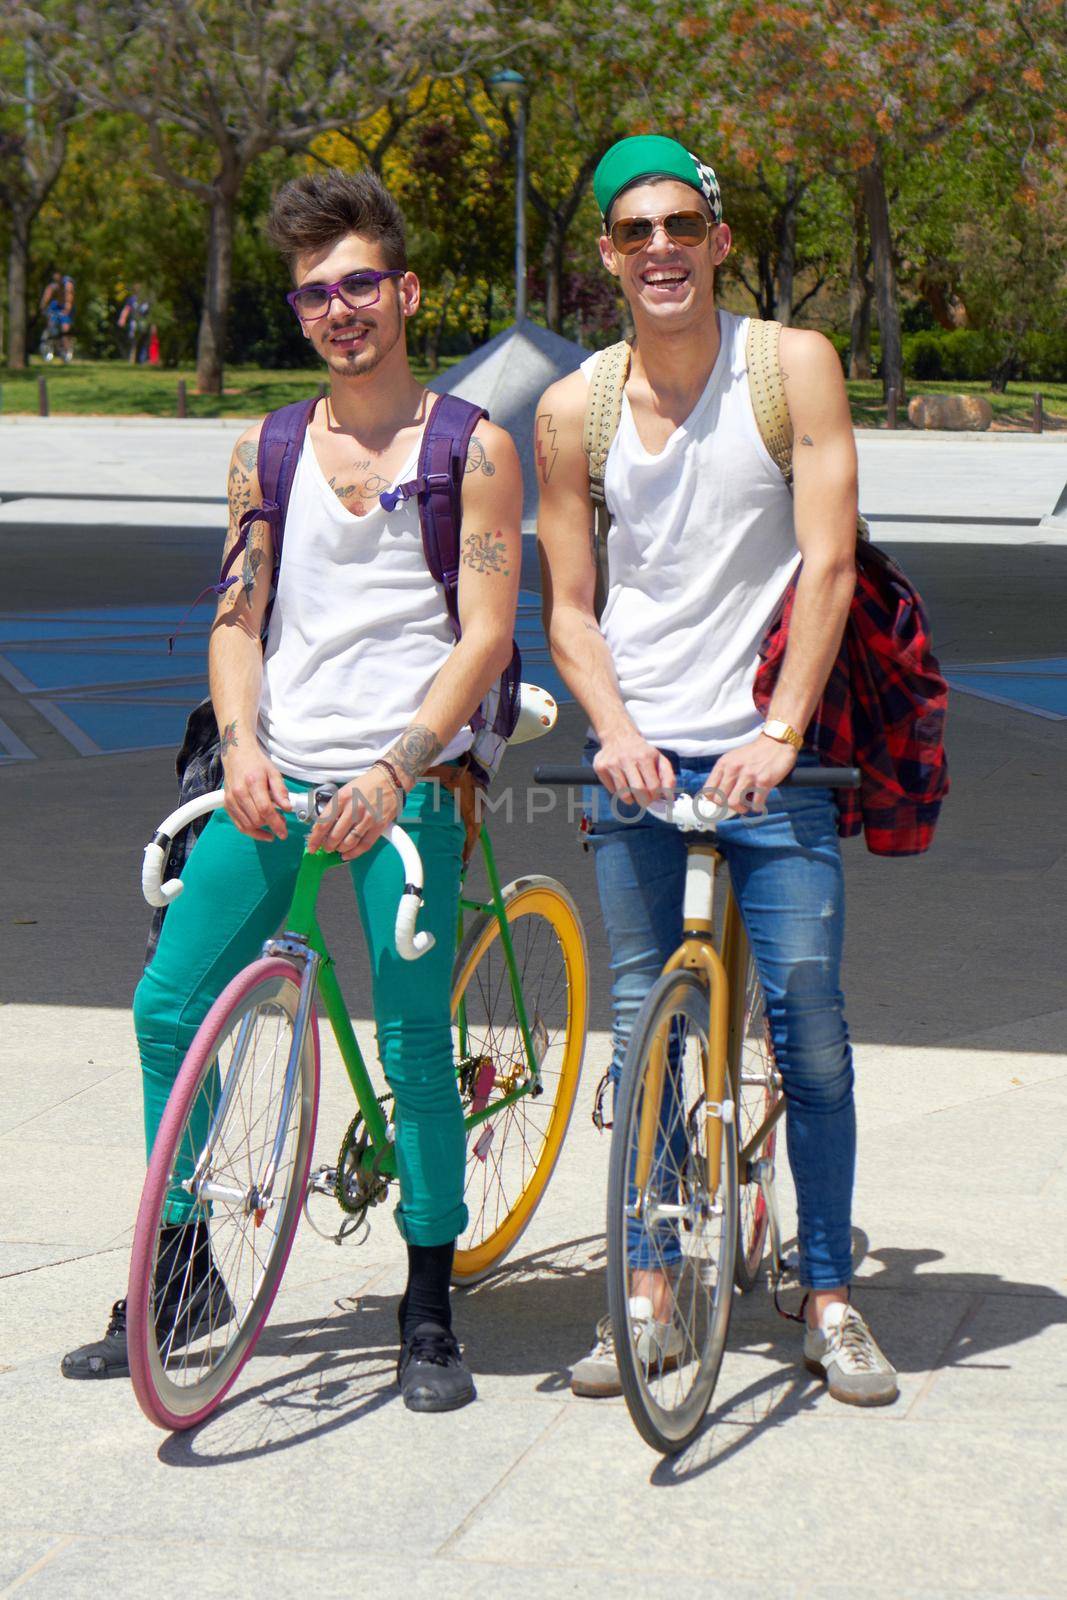 Chillin after a good ride. Full length shot of two young guys sitting on their bikes outdoors